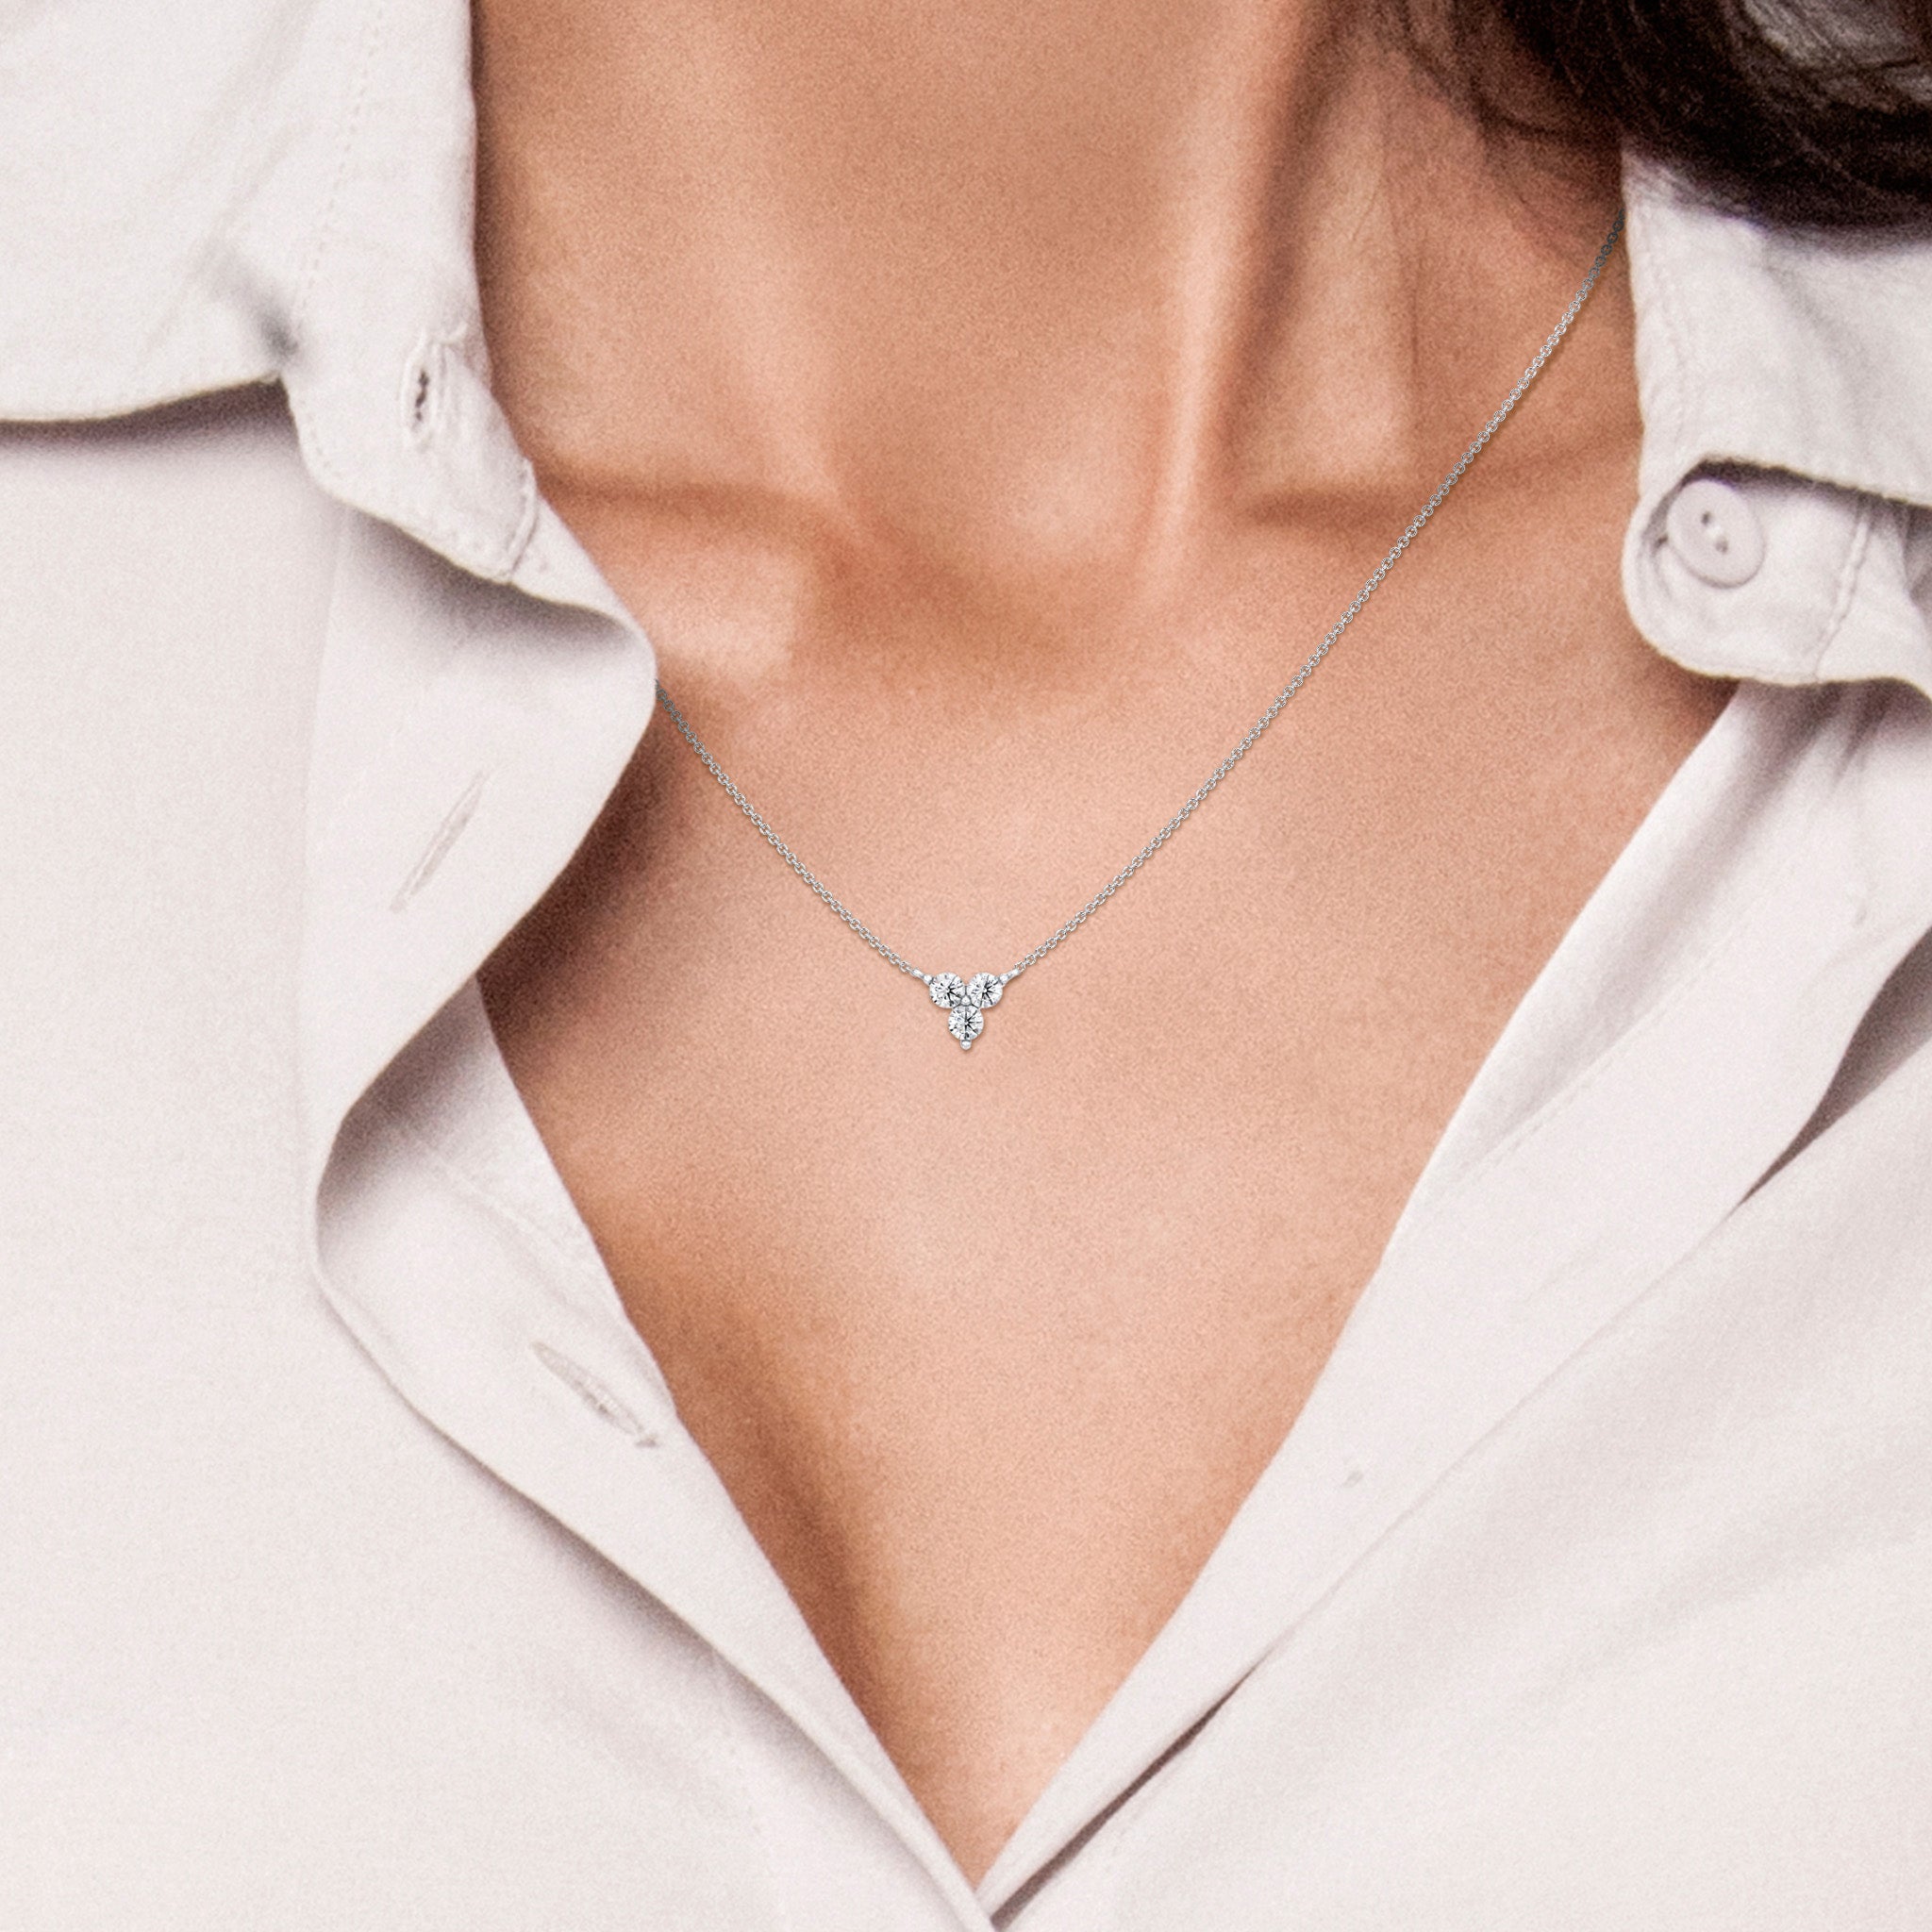 Shimansky - Women Wearing the Clover Diamond Necklace crafted in 14K White Gold